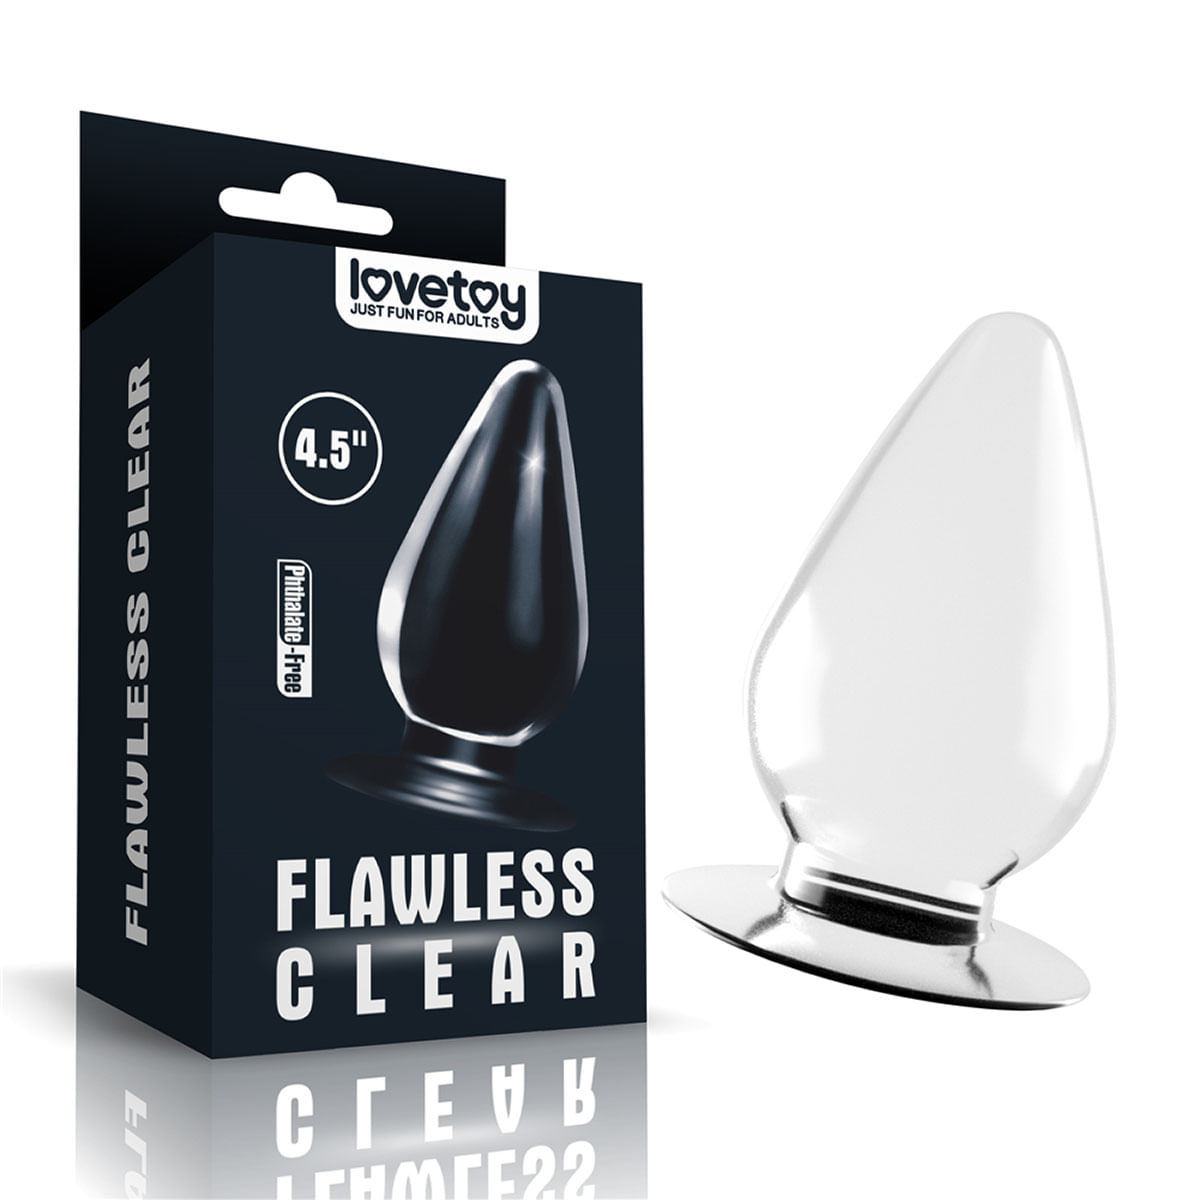 Flawless Clear Plug Anal Feito em Jelly Vip Mix